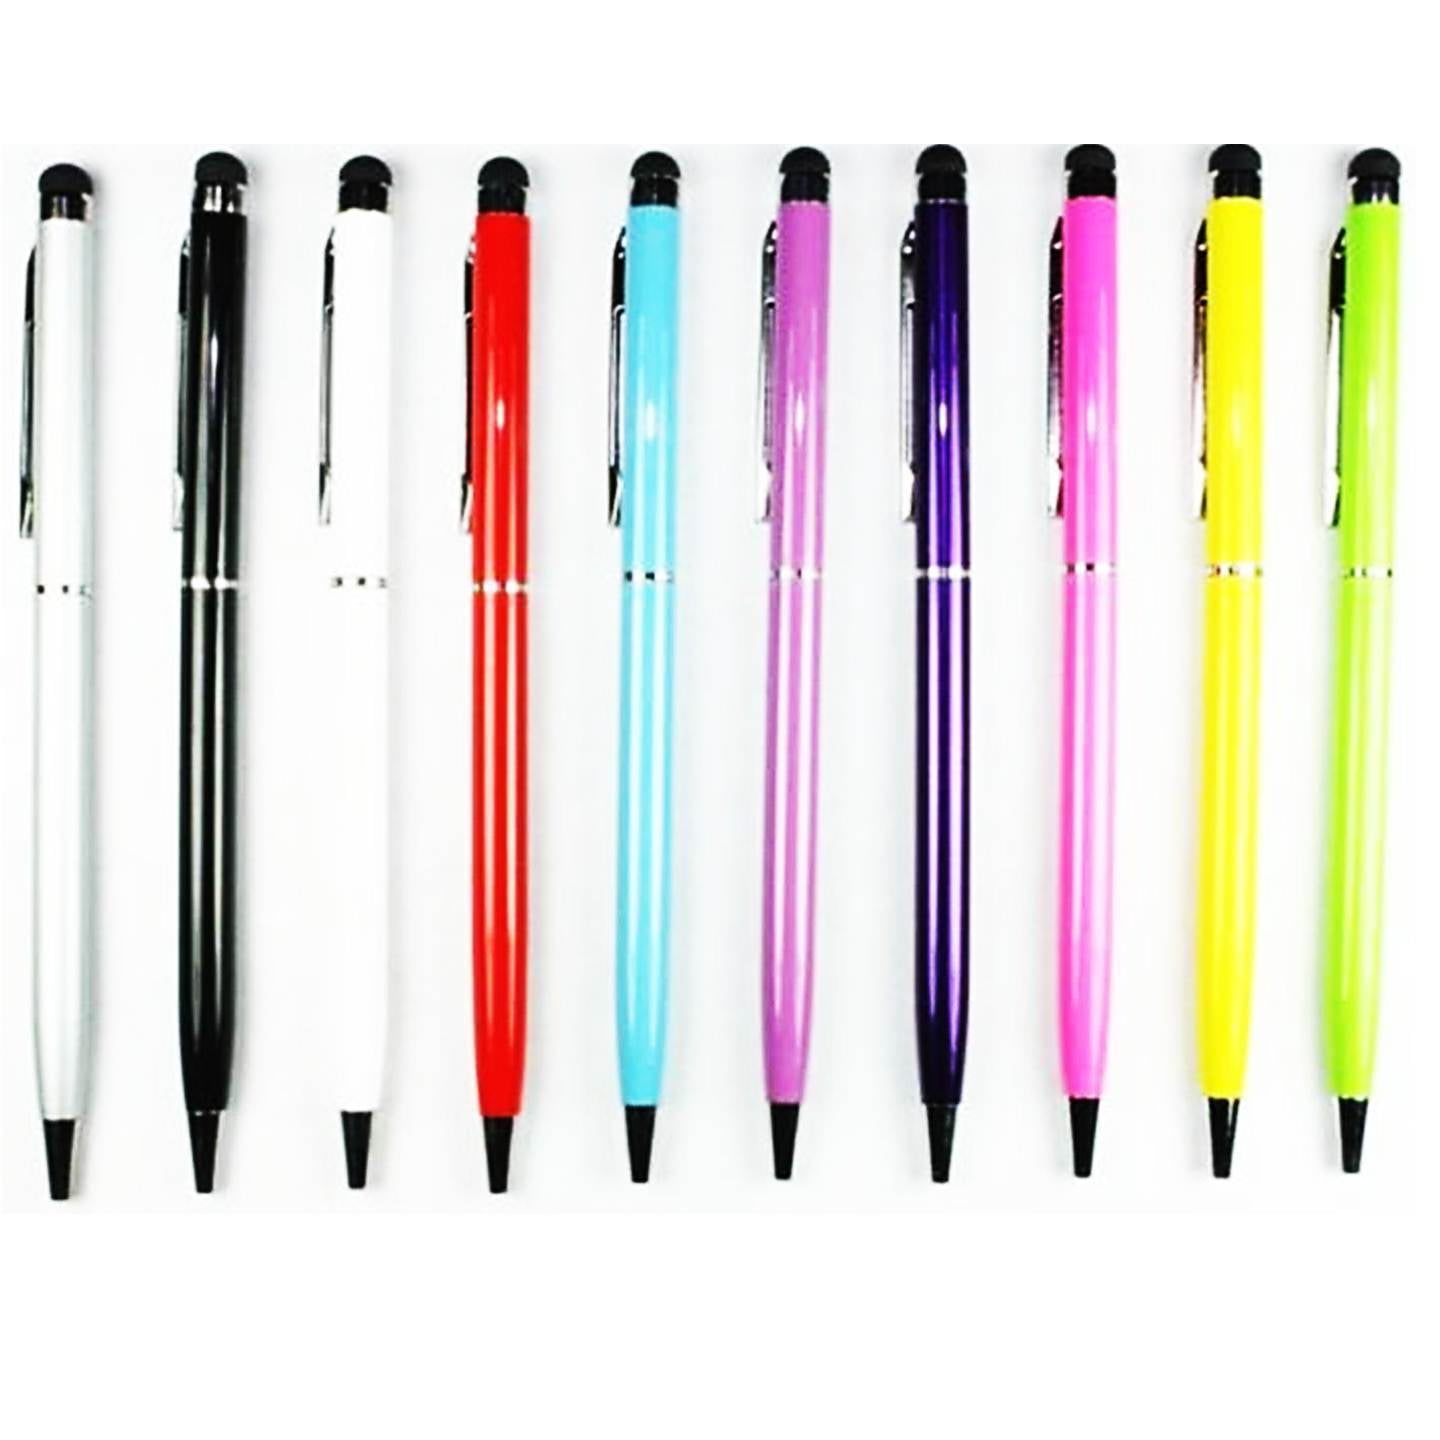 100PCS Universal Touch Screen Stylus Pen For Samsung Tablet PC Tab iPad iPhone 